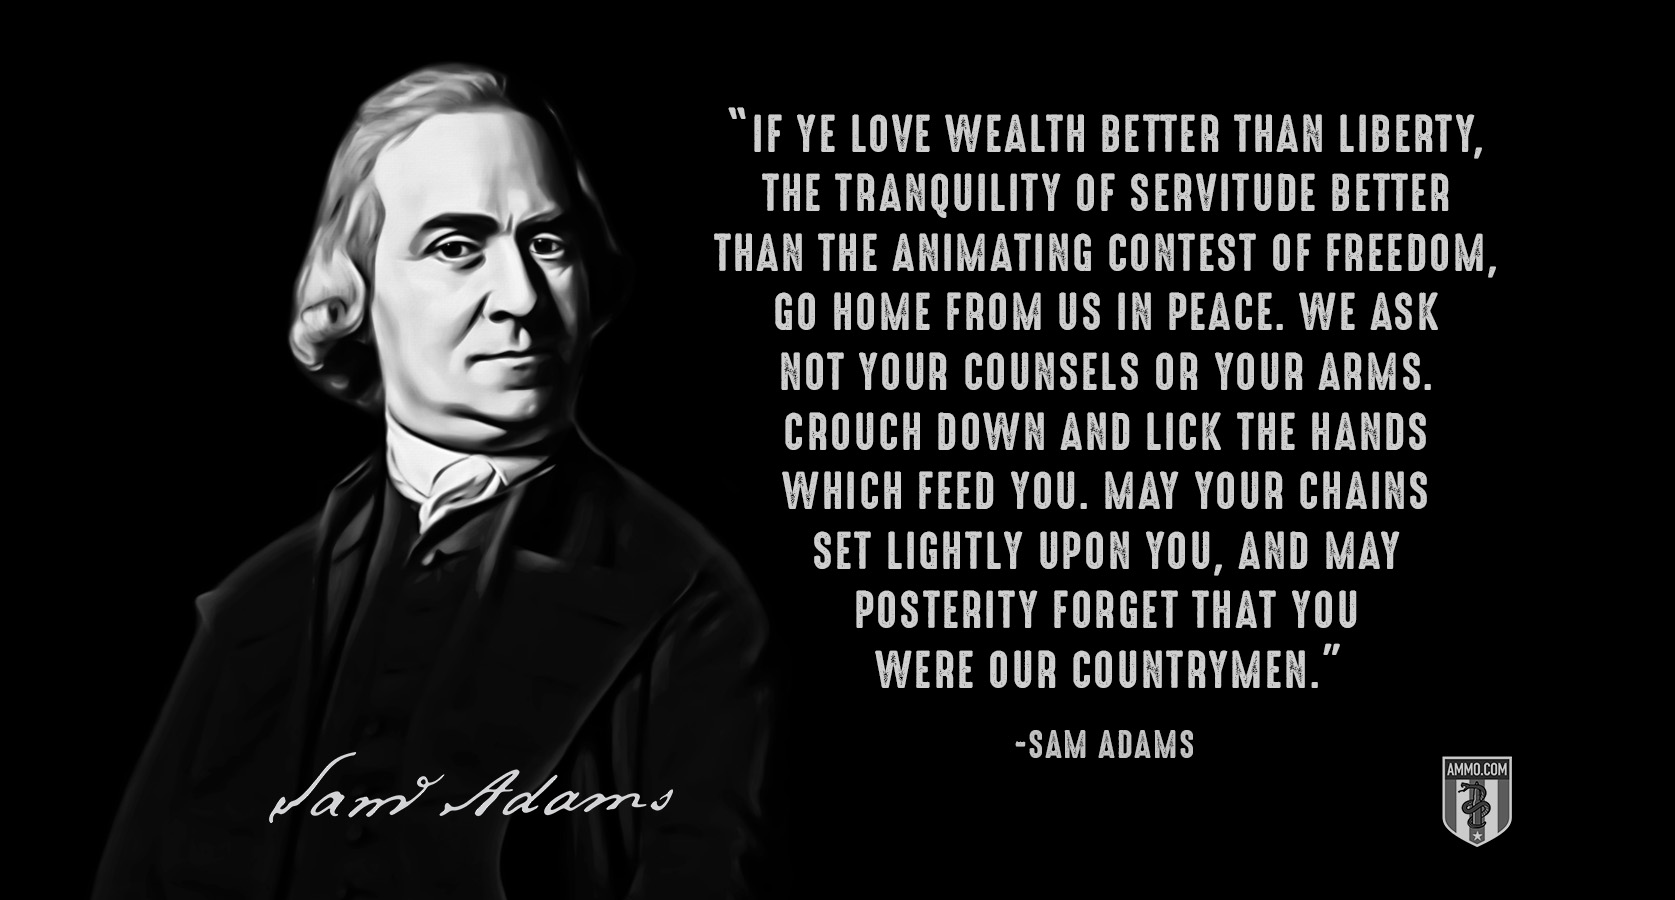 Sam-Adams-If-ye-love-wealth-better-than-liberty-the-tranquility-of-servitude-better-than-the-animating-contest-of-freedom-go-home-from-us-in-peace-we-ask-not-your-counsels-or-your-arms-crouch-down-and-lick-the-hands-which-feed-you.jpg